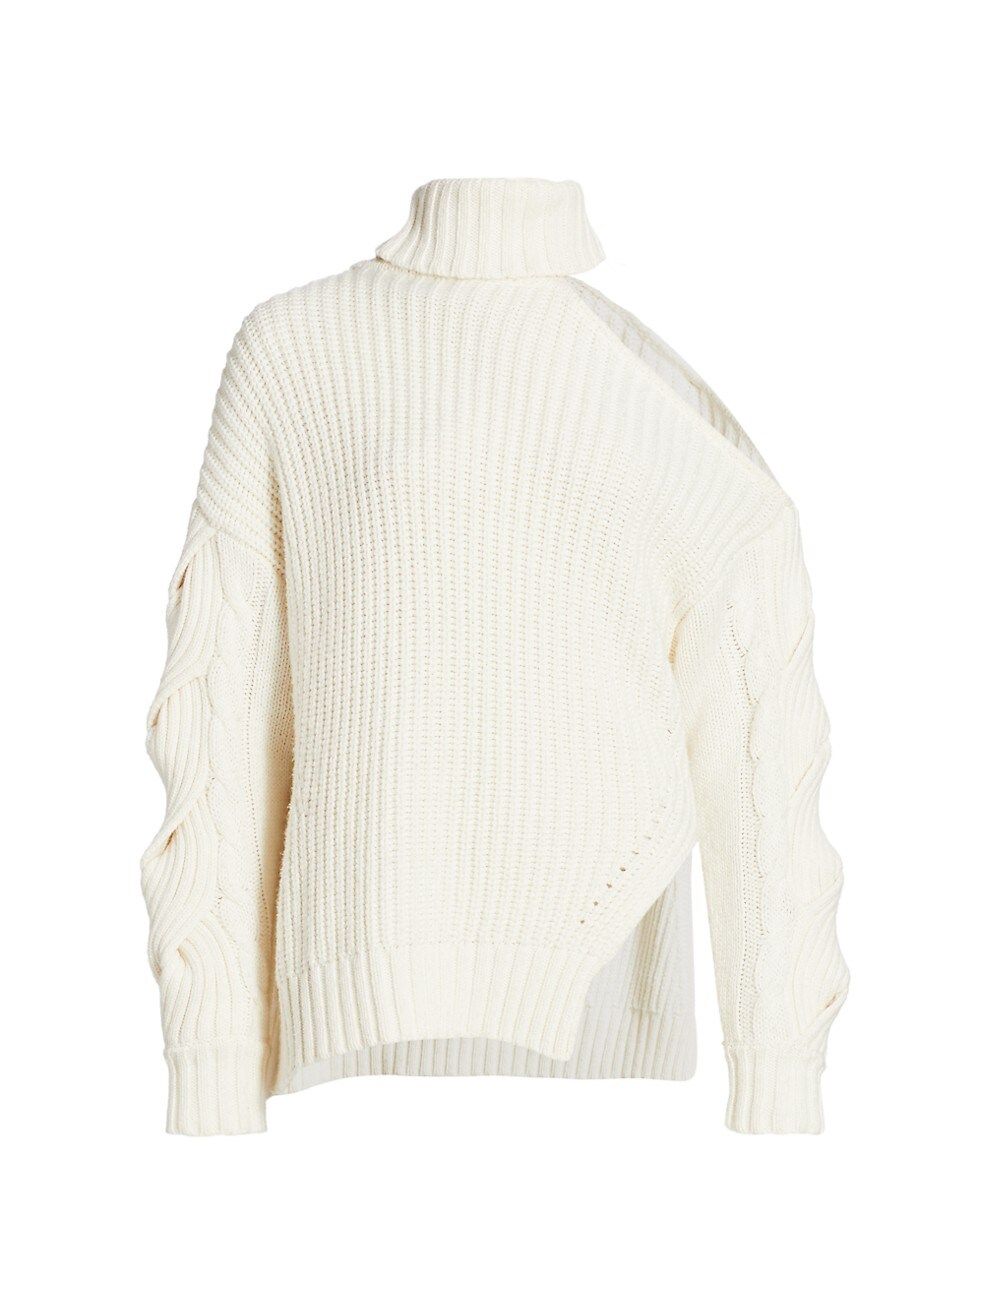 Jonathan Simkhai Aubrey One-Shoulder Traveling Wool-Blend Cable Knit Sweater | Saks Fifth Avenue